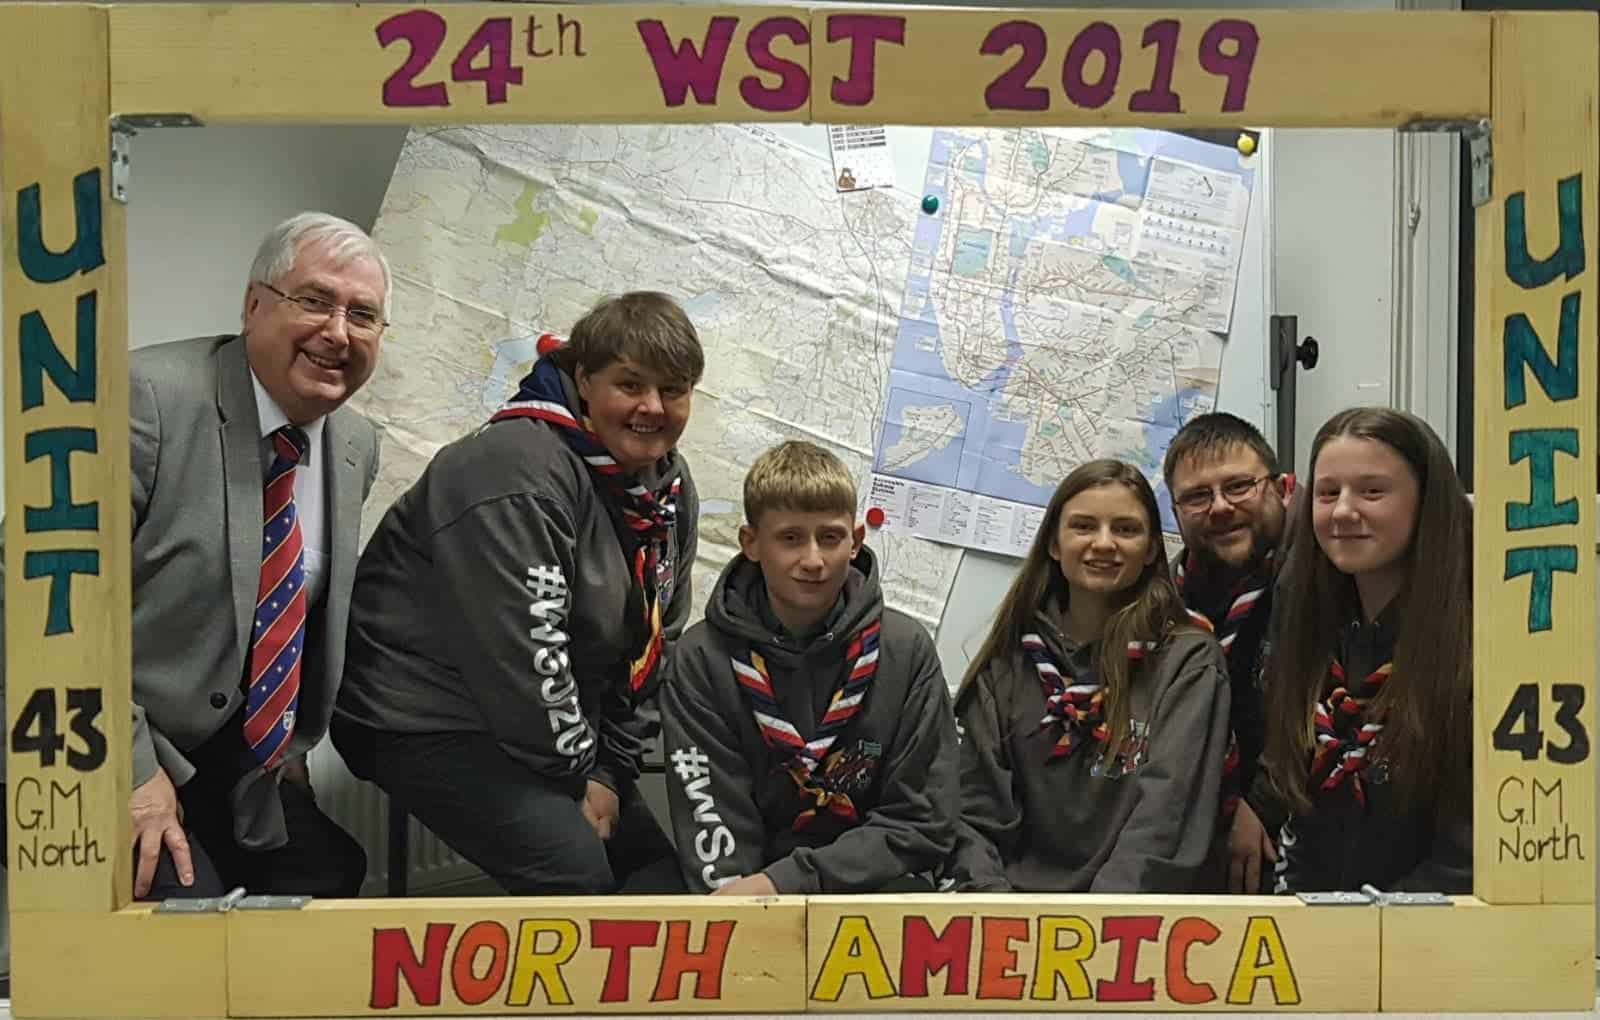 Masonic Charity helps Greater Manchester Scouts prepare for World Jamboree